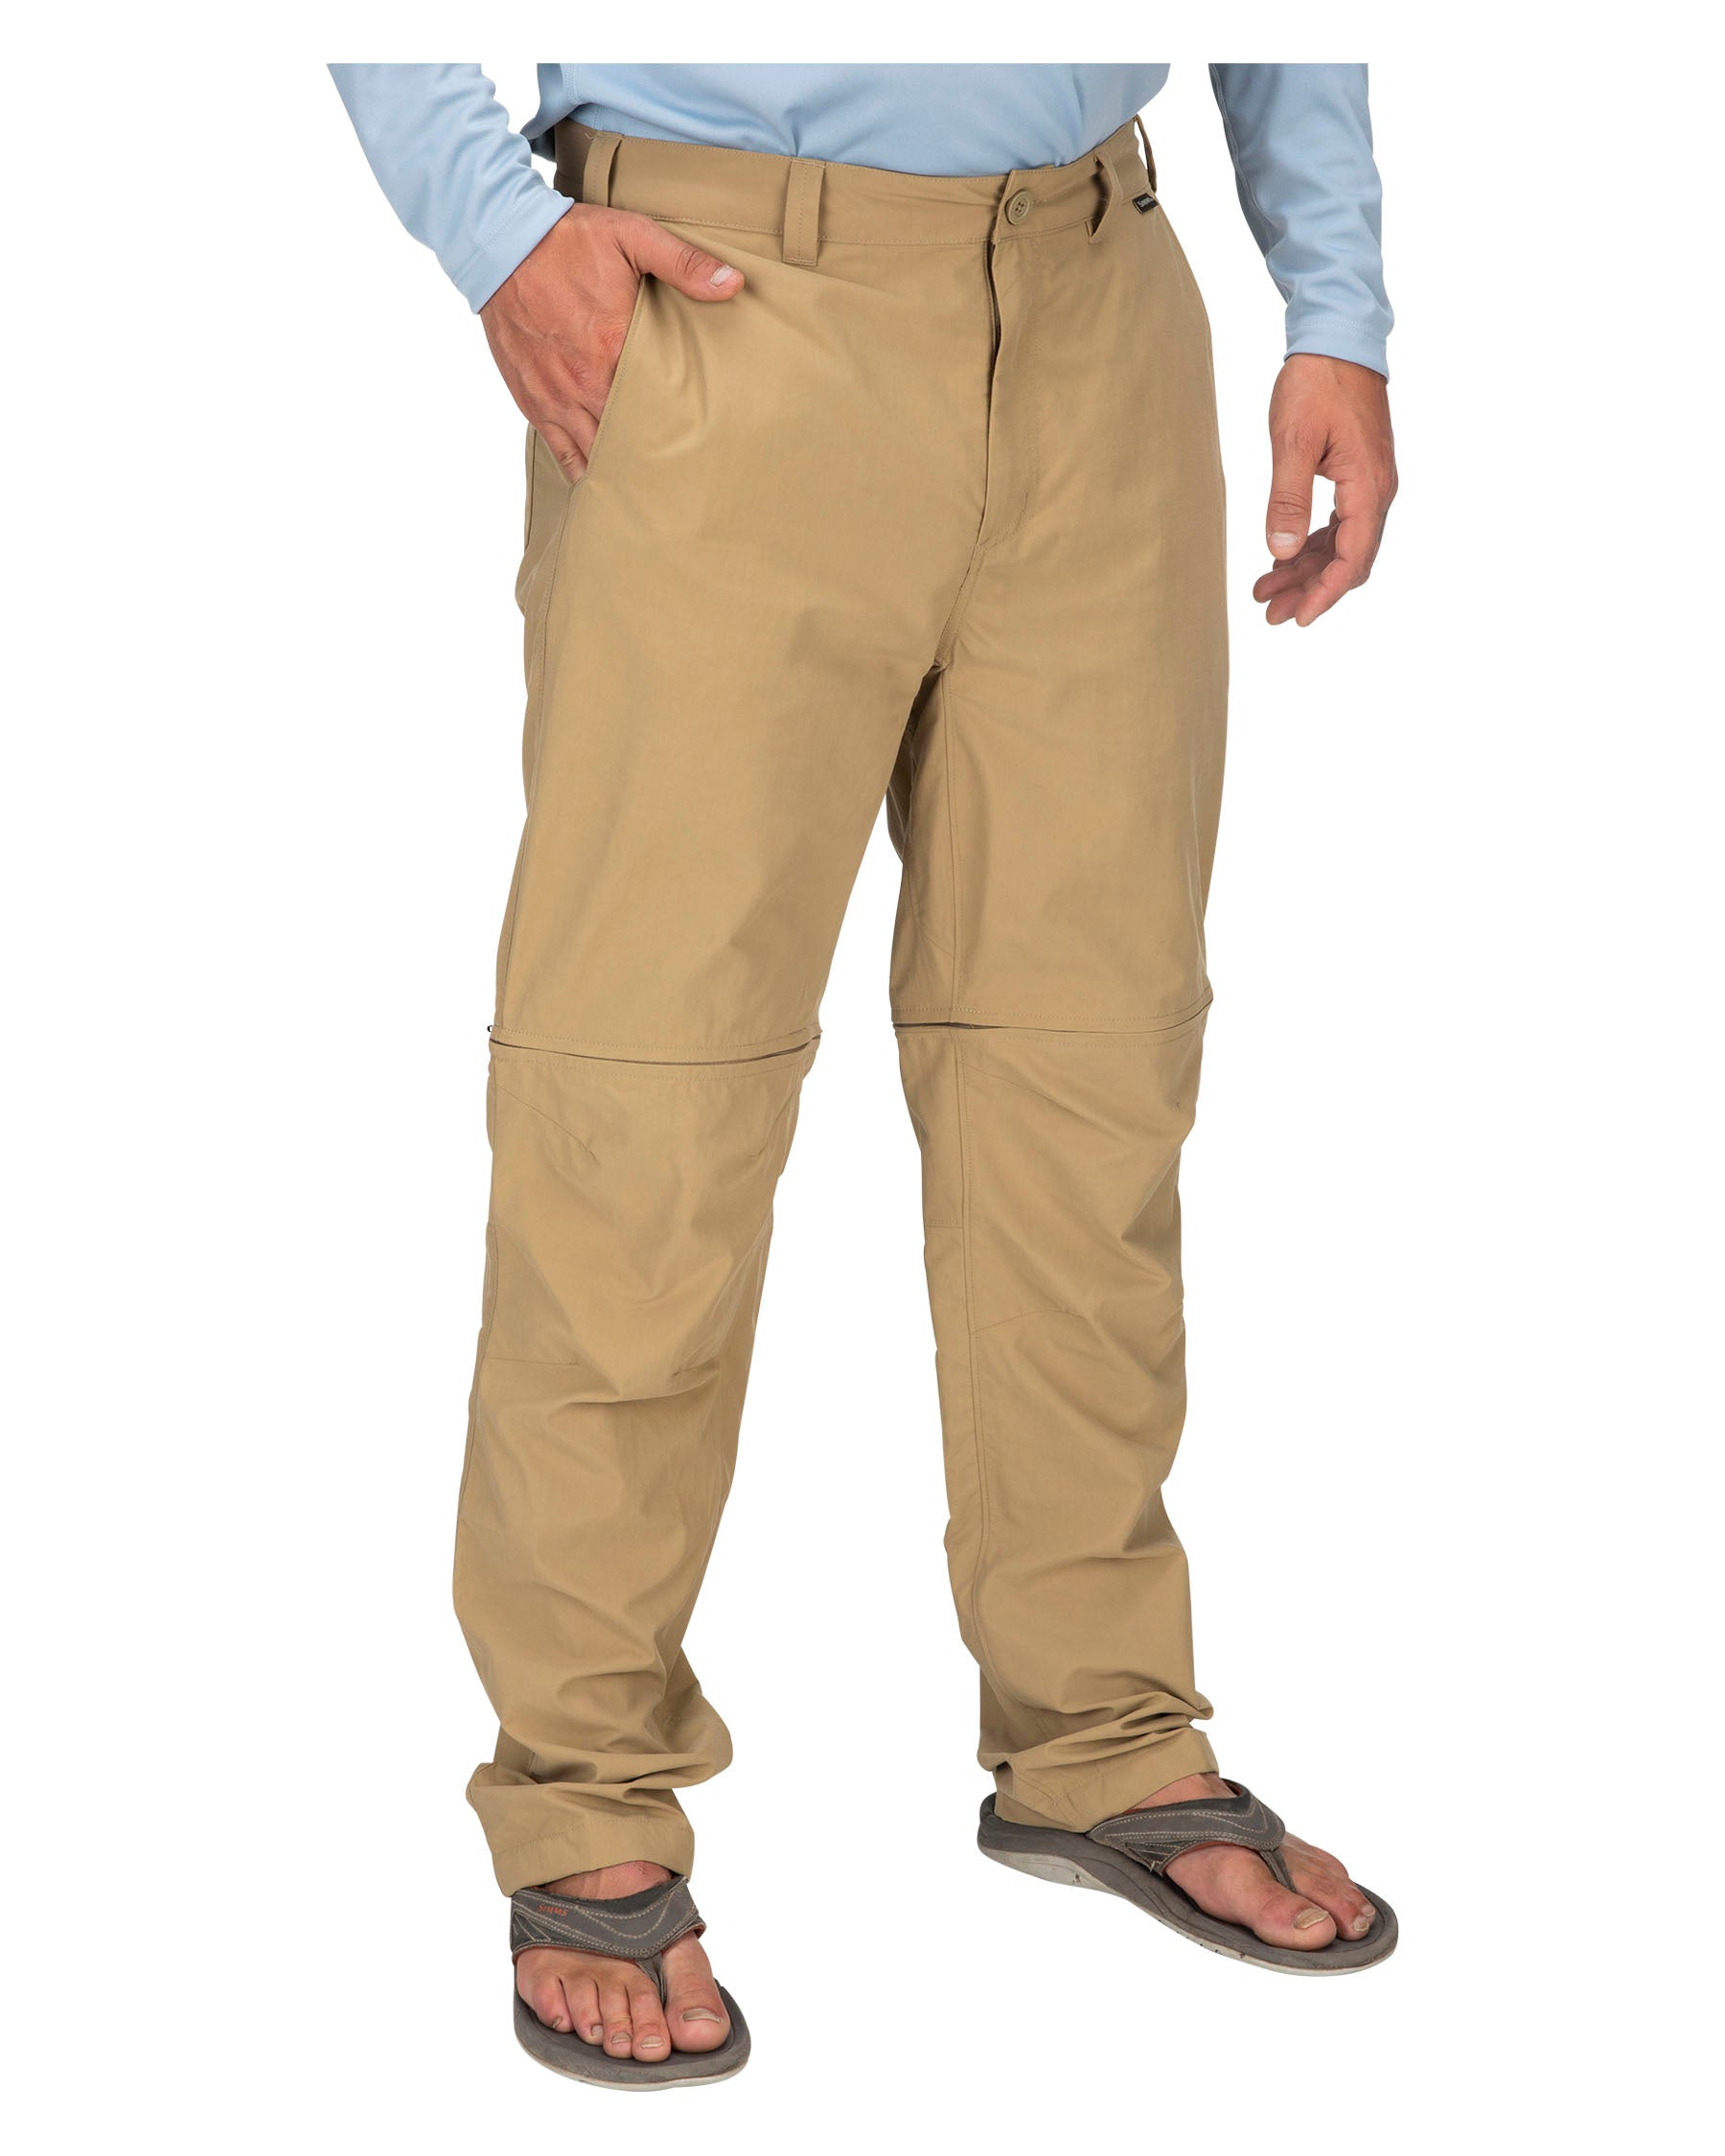 M's Superlight Zip-Off Fishing Pants | Simms Fishing Products